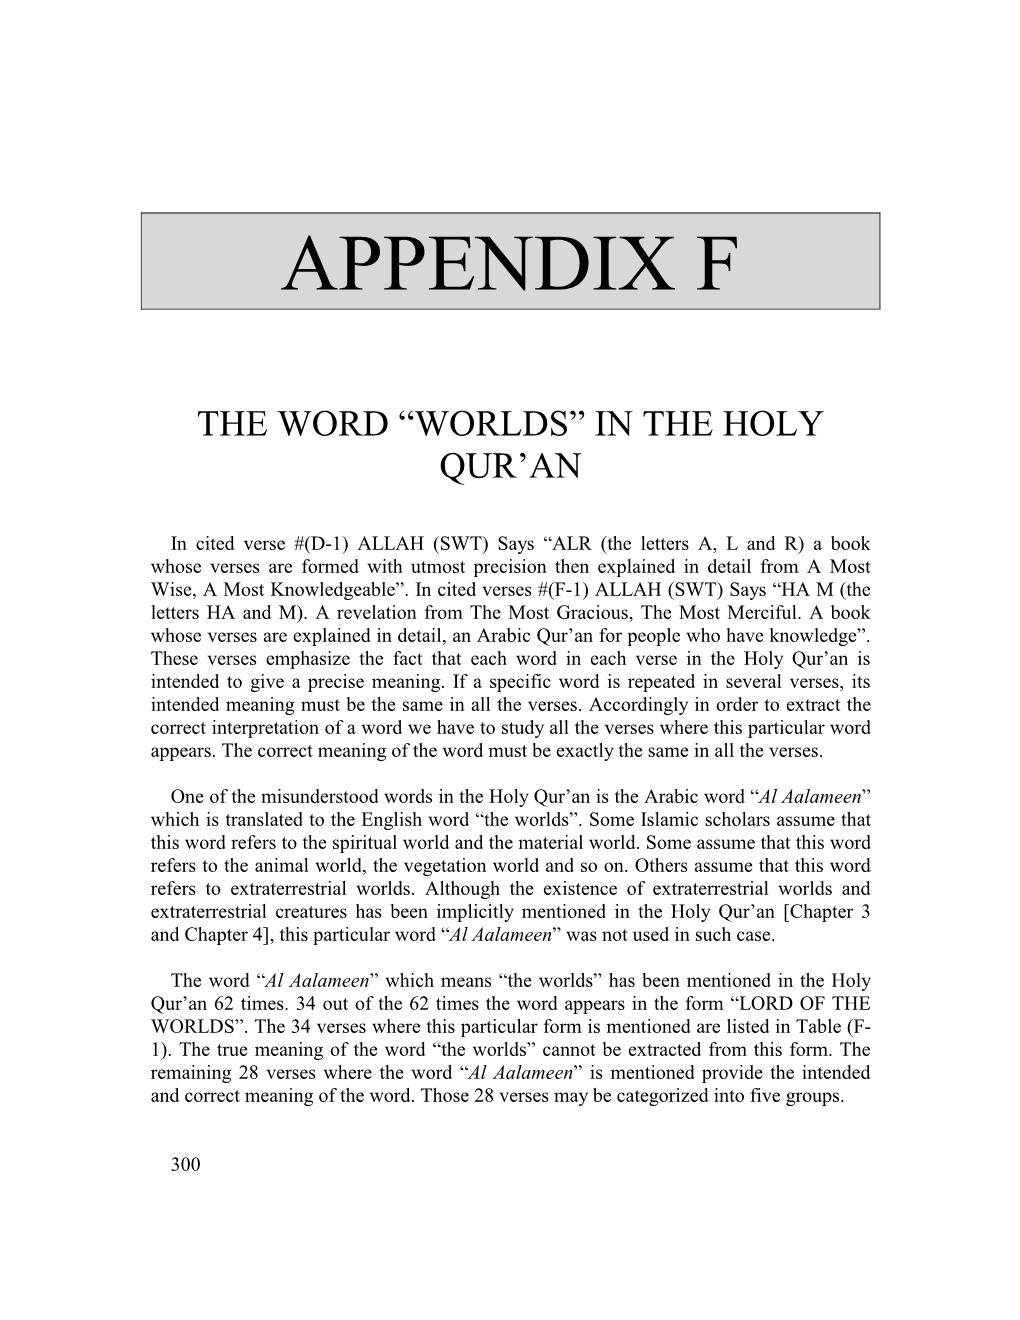 Appendix F: the Word "Worlds"